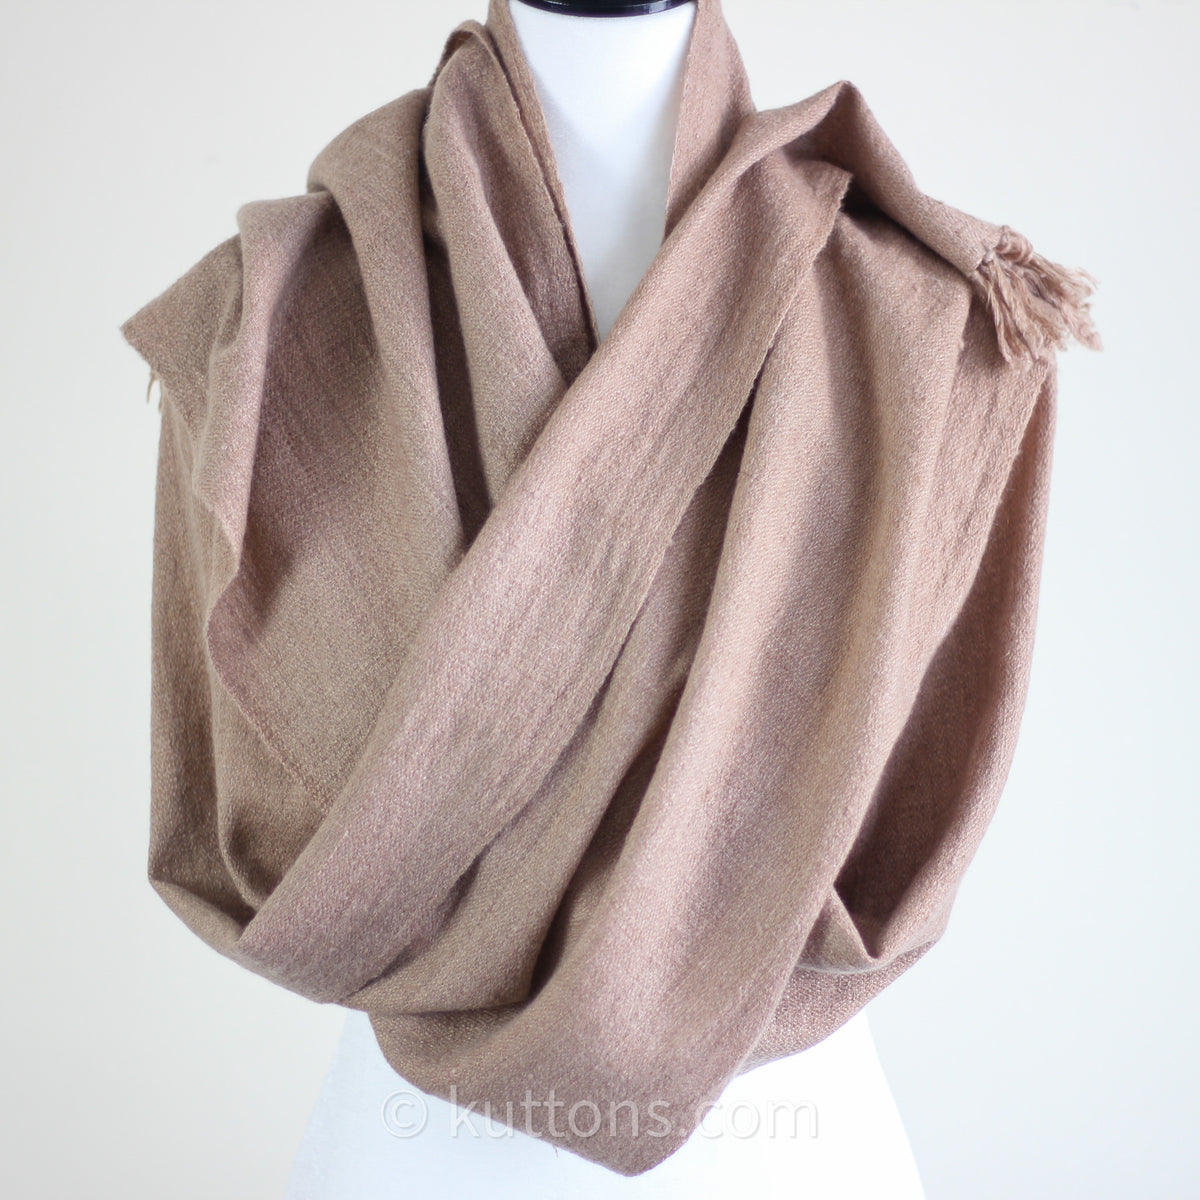 Handcrafted Pashmina Cashmere Muffler - Soft, Lightweight, and Ethically Made in Ladakh Himalayas | Brown, 13.5x90"